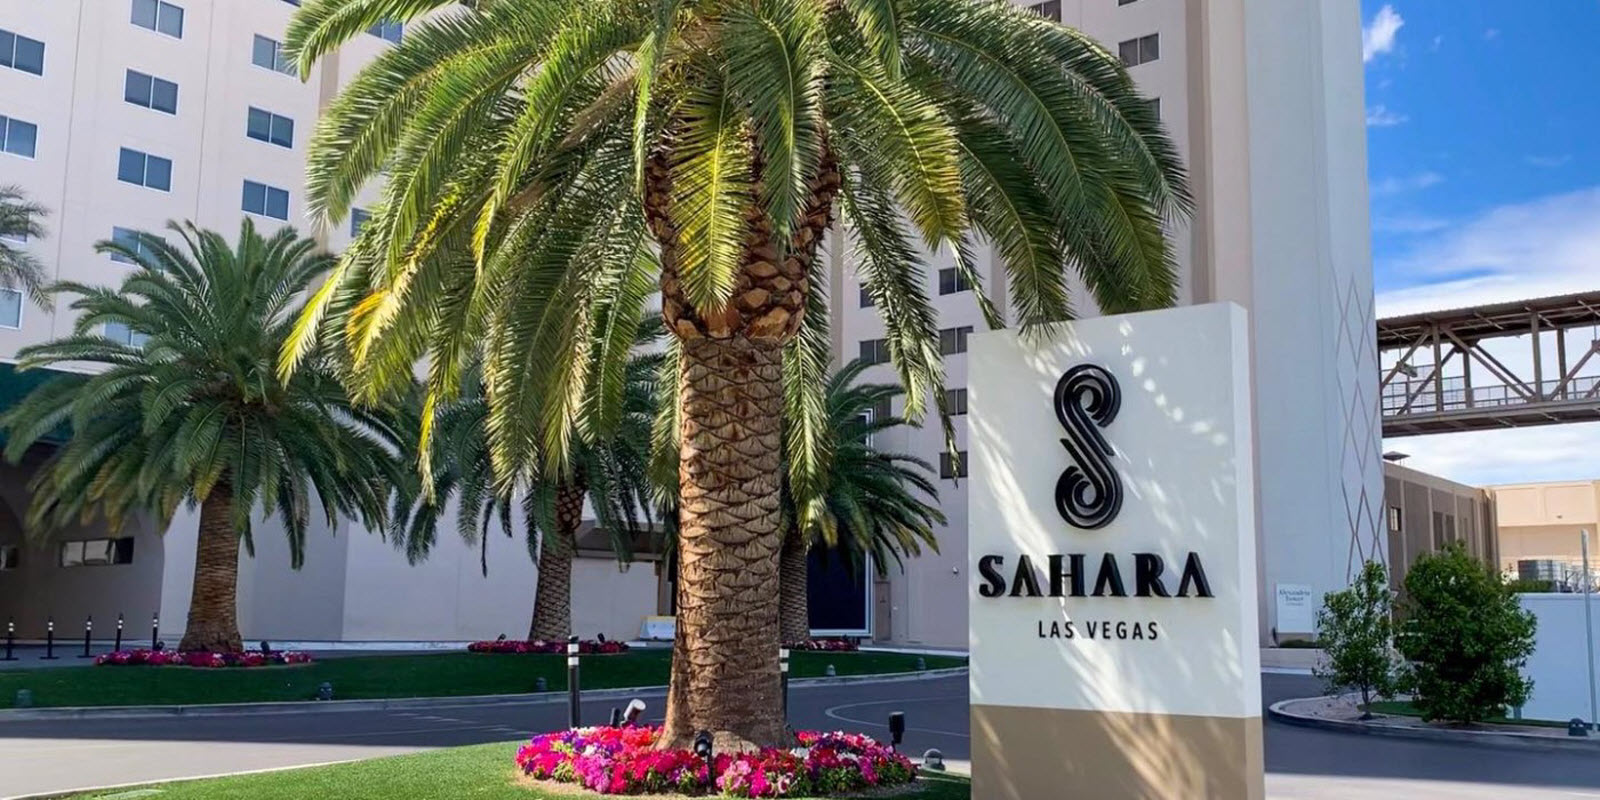 Outdoor image of the SAHARA Las vegas building with palm tree by the sign